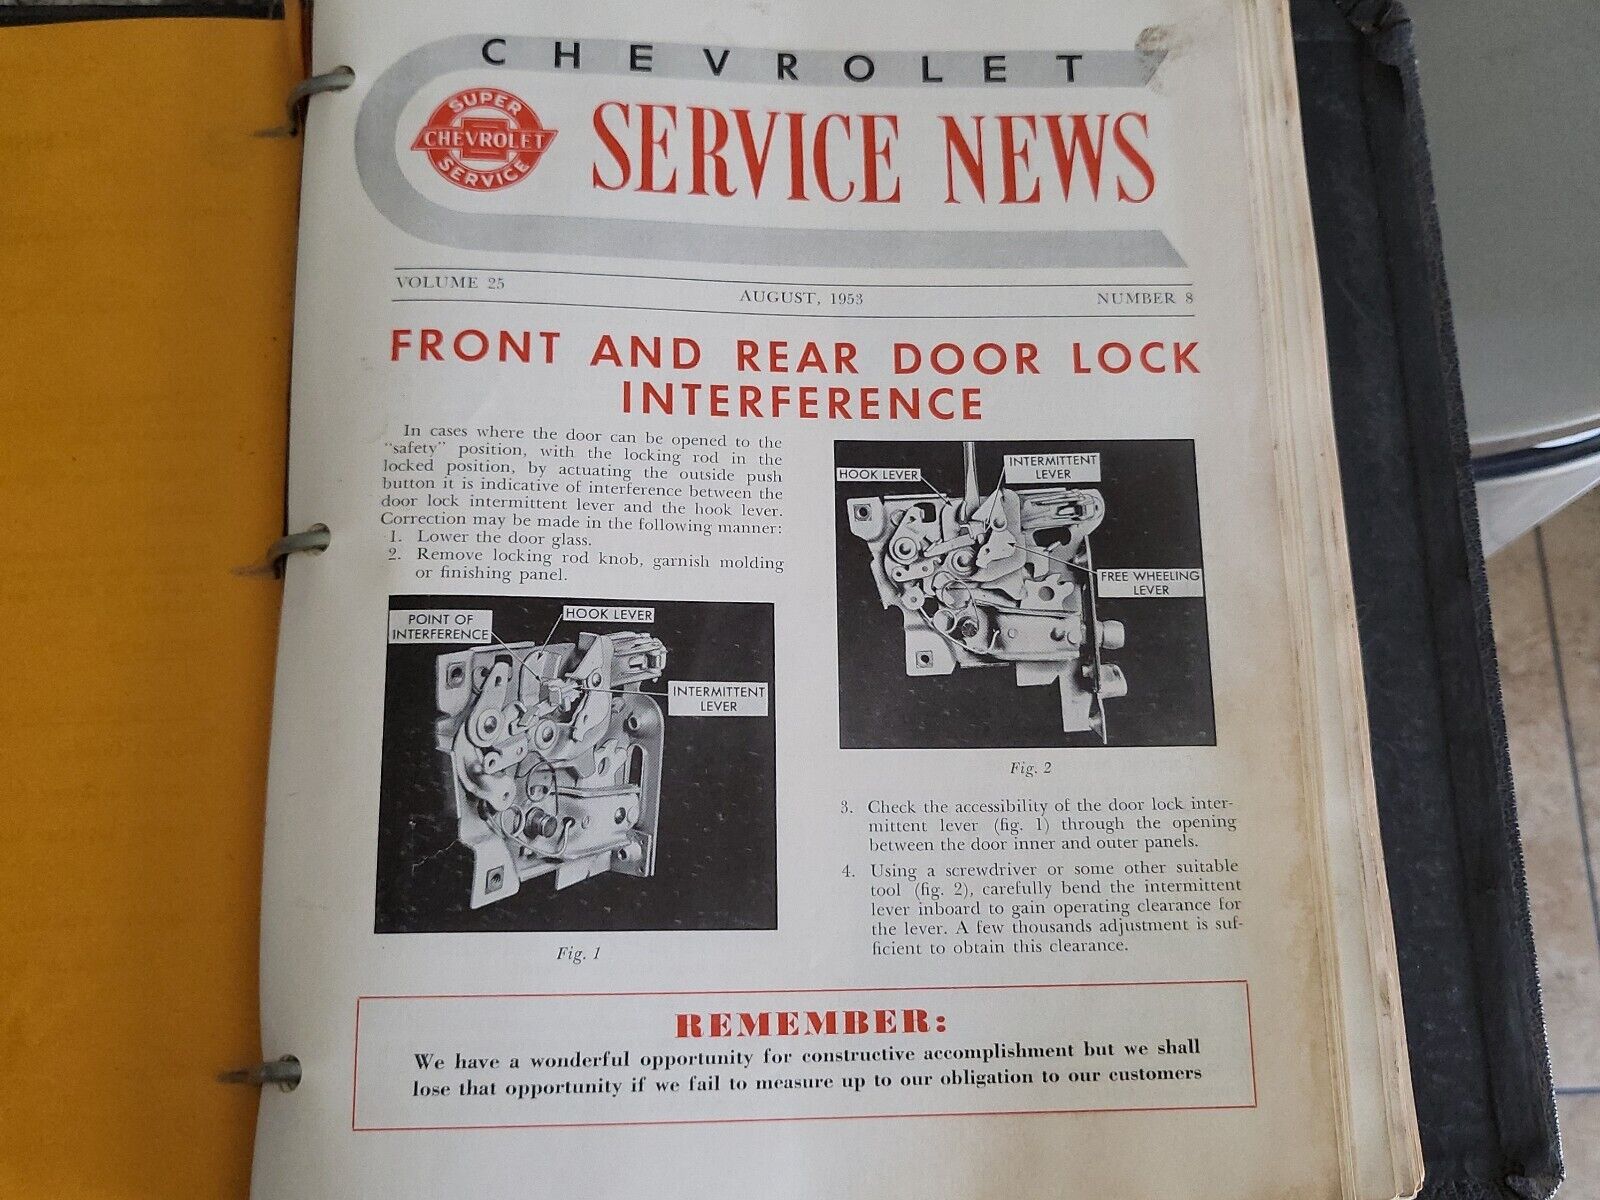 Vintage Chevrolet Service News Various Volumes From December 1947 - August 1953